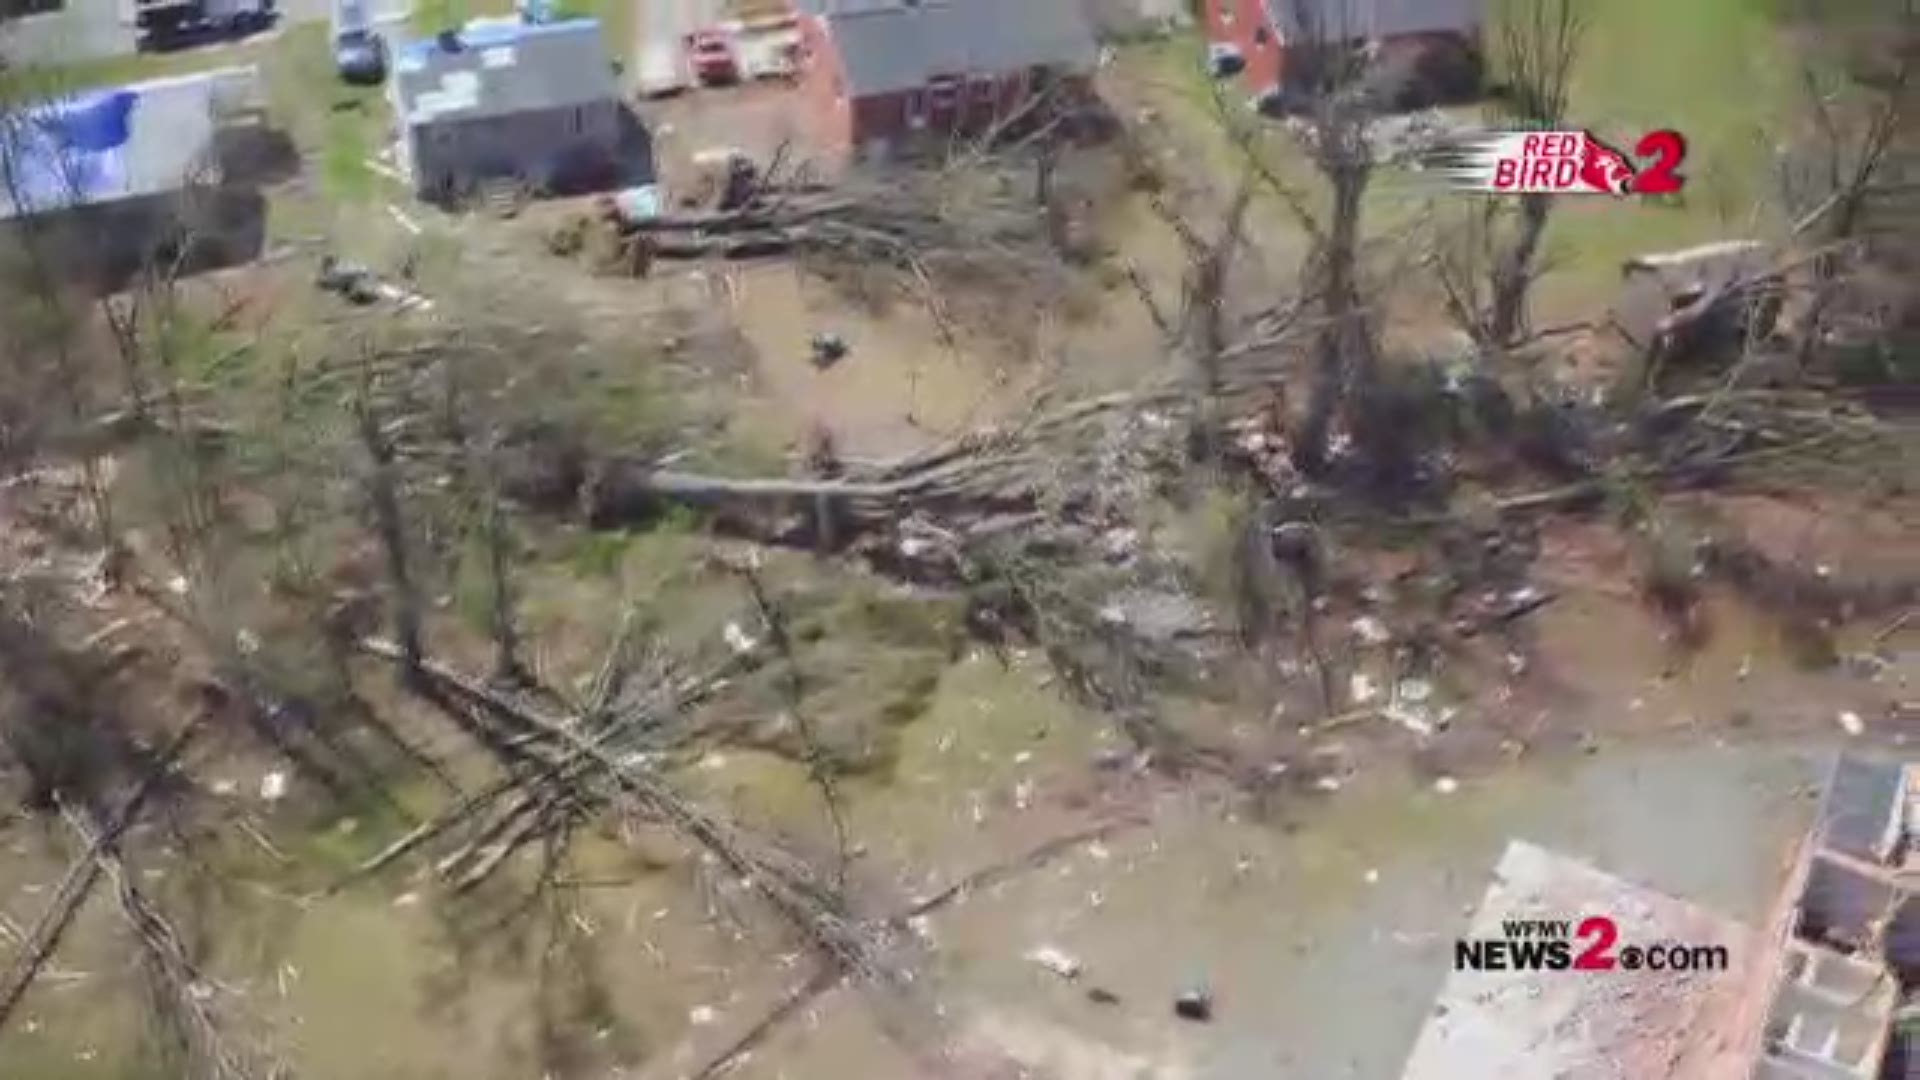 Red Bird 2 Video | Trees Down, Roof Blown Off Church in Northeast Greensboro